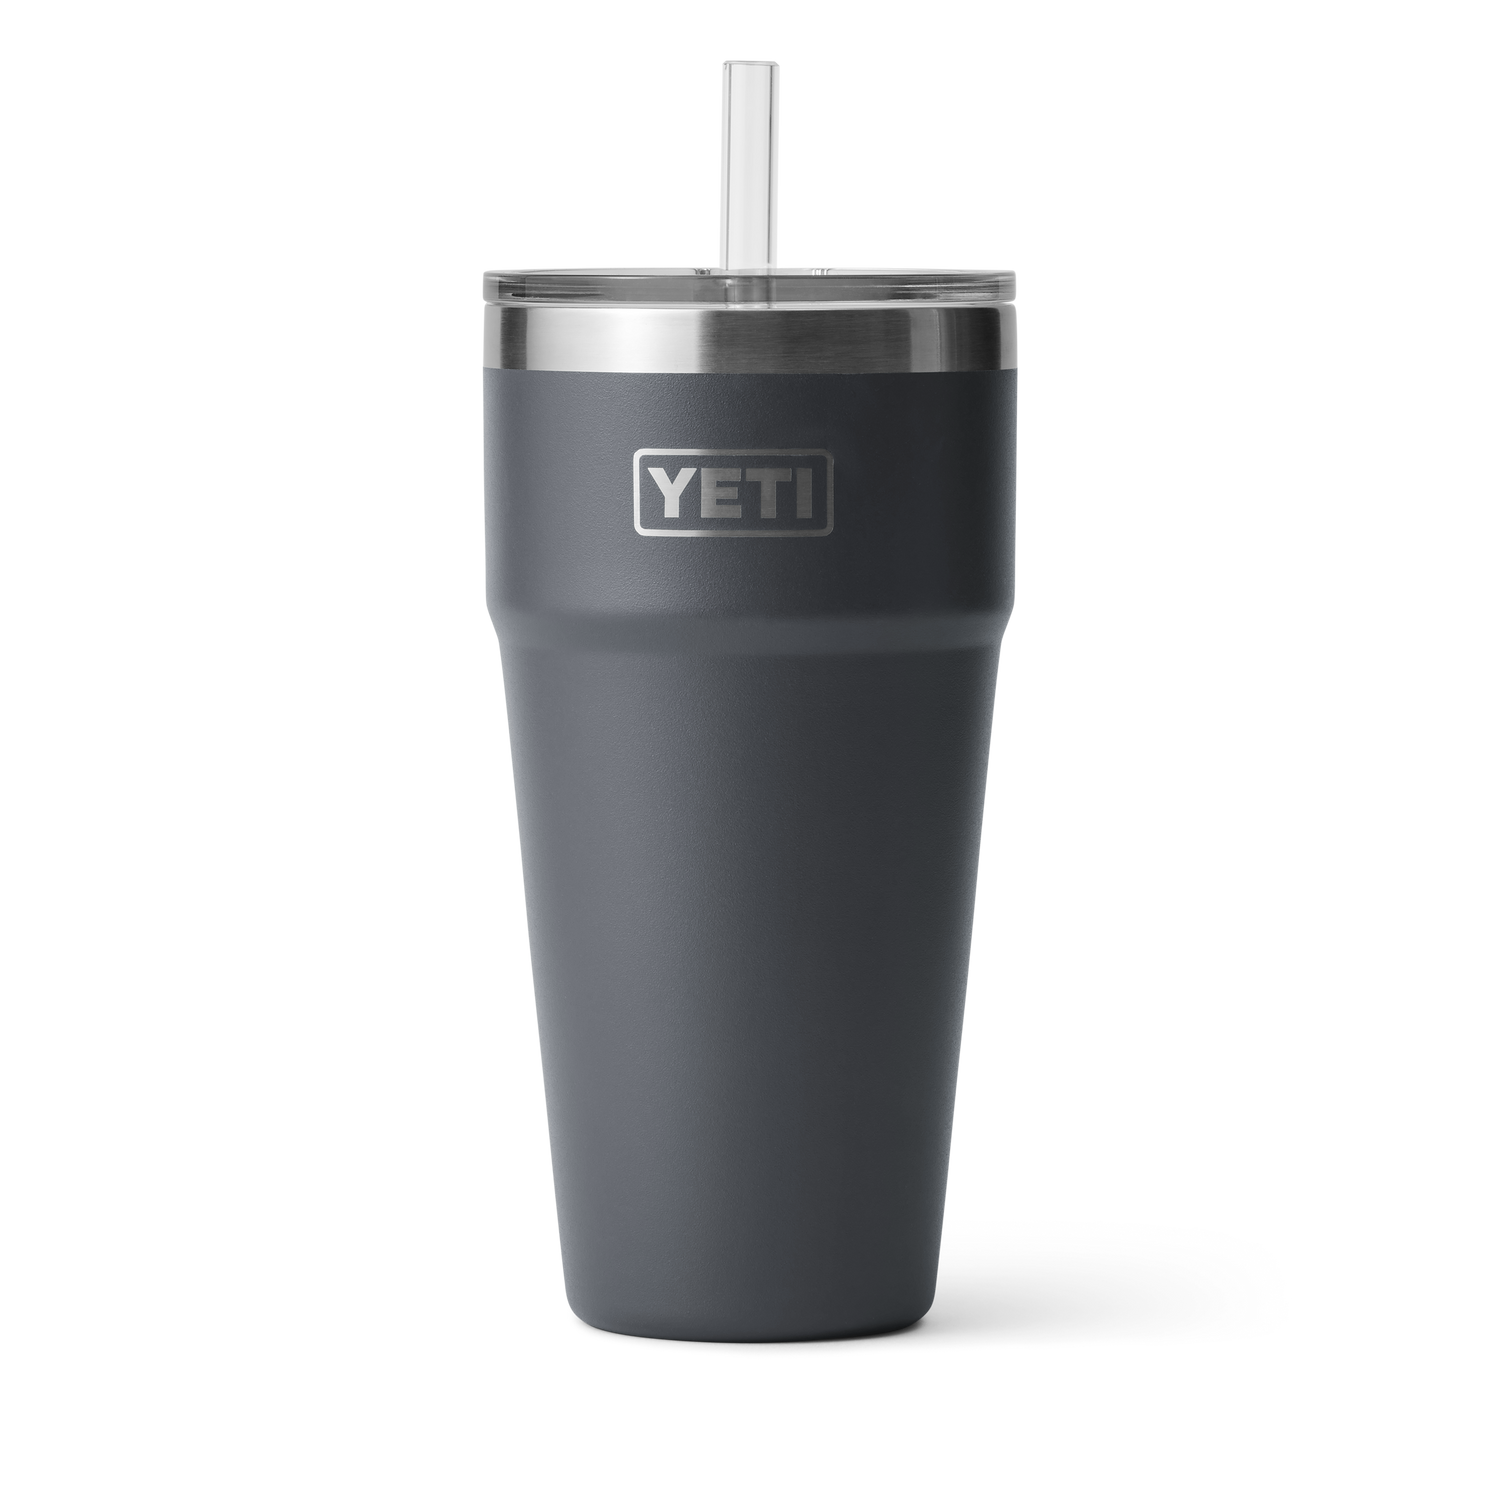 30 oz Tumbler Lid Replacement Lids Compatible with YETI 30 oz Tumbler, 14  oz Mug and 35 oz Straw Mug- Replacement Magnetic Slide/Cover (30 Oz, 1Pack)